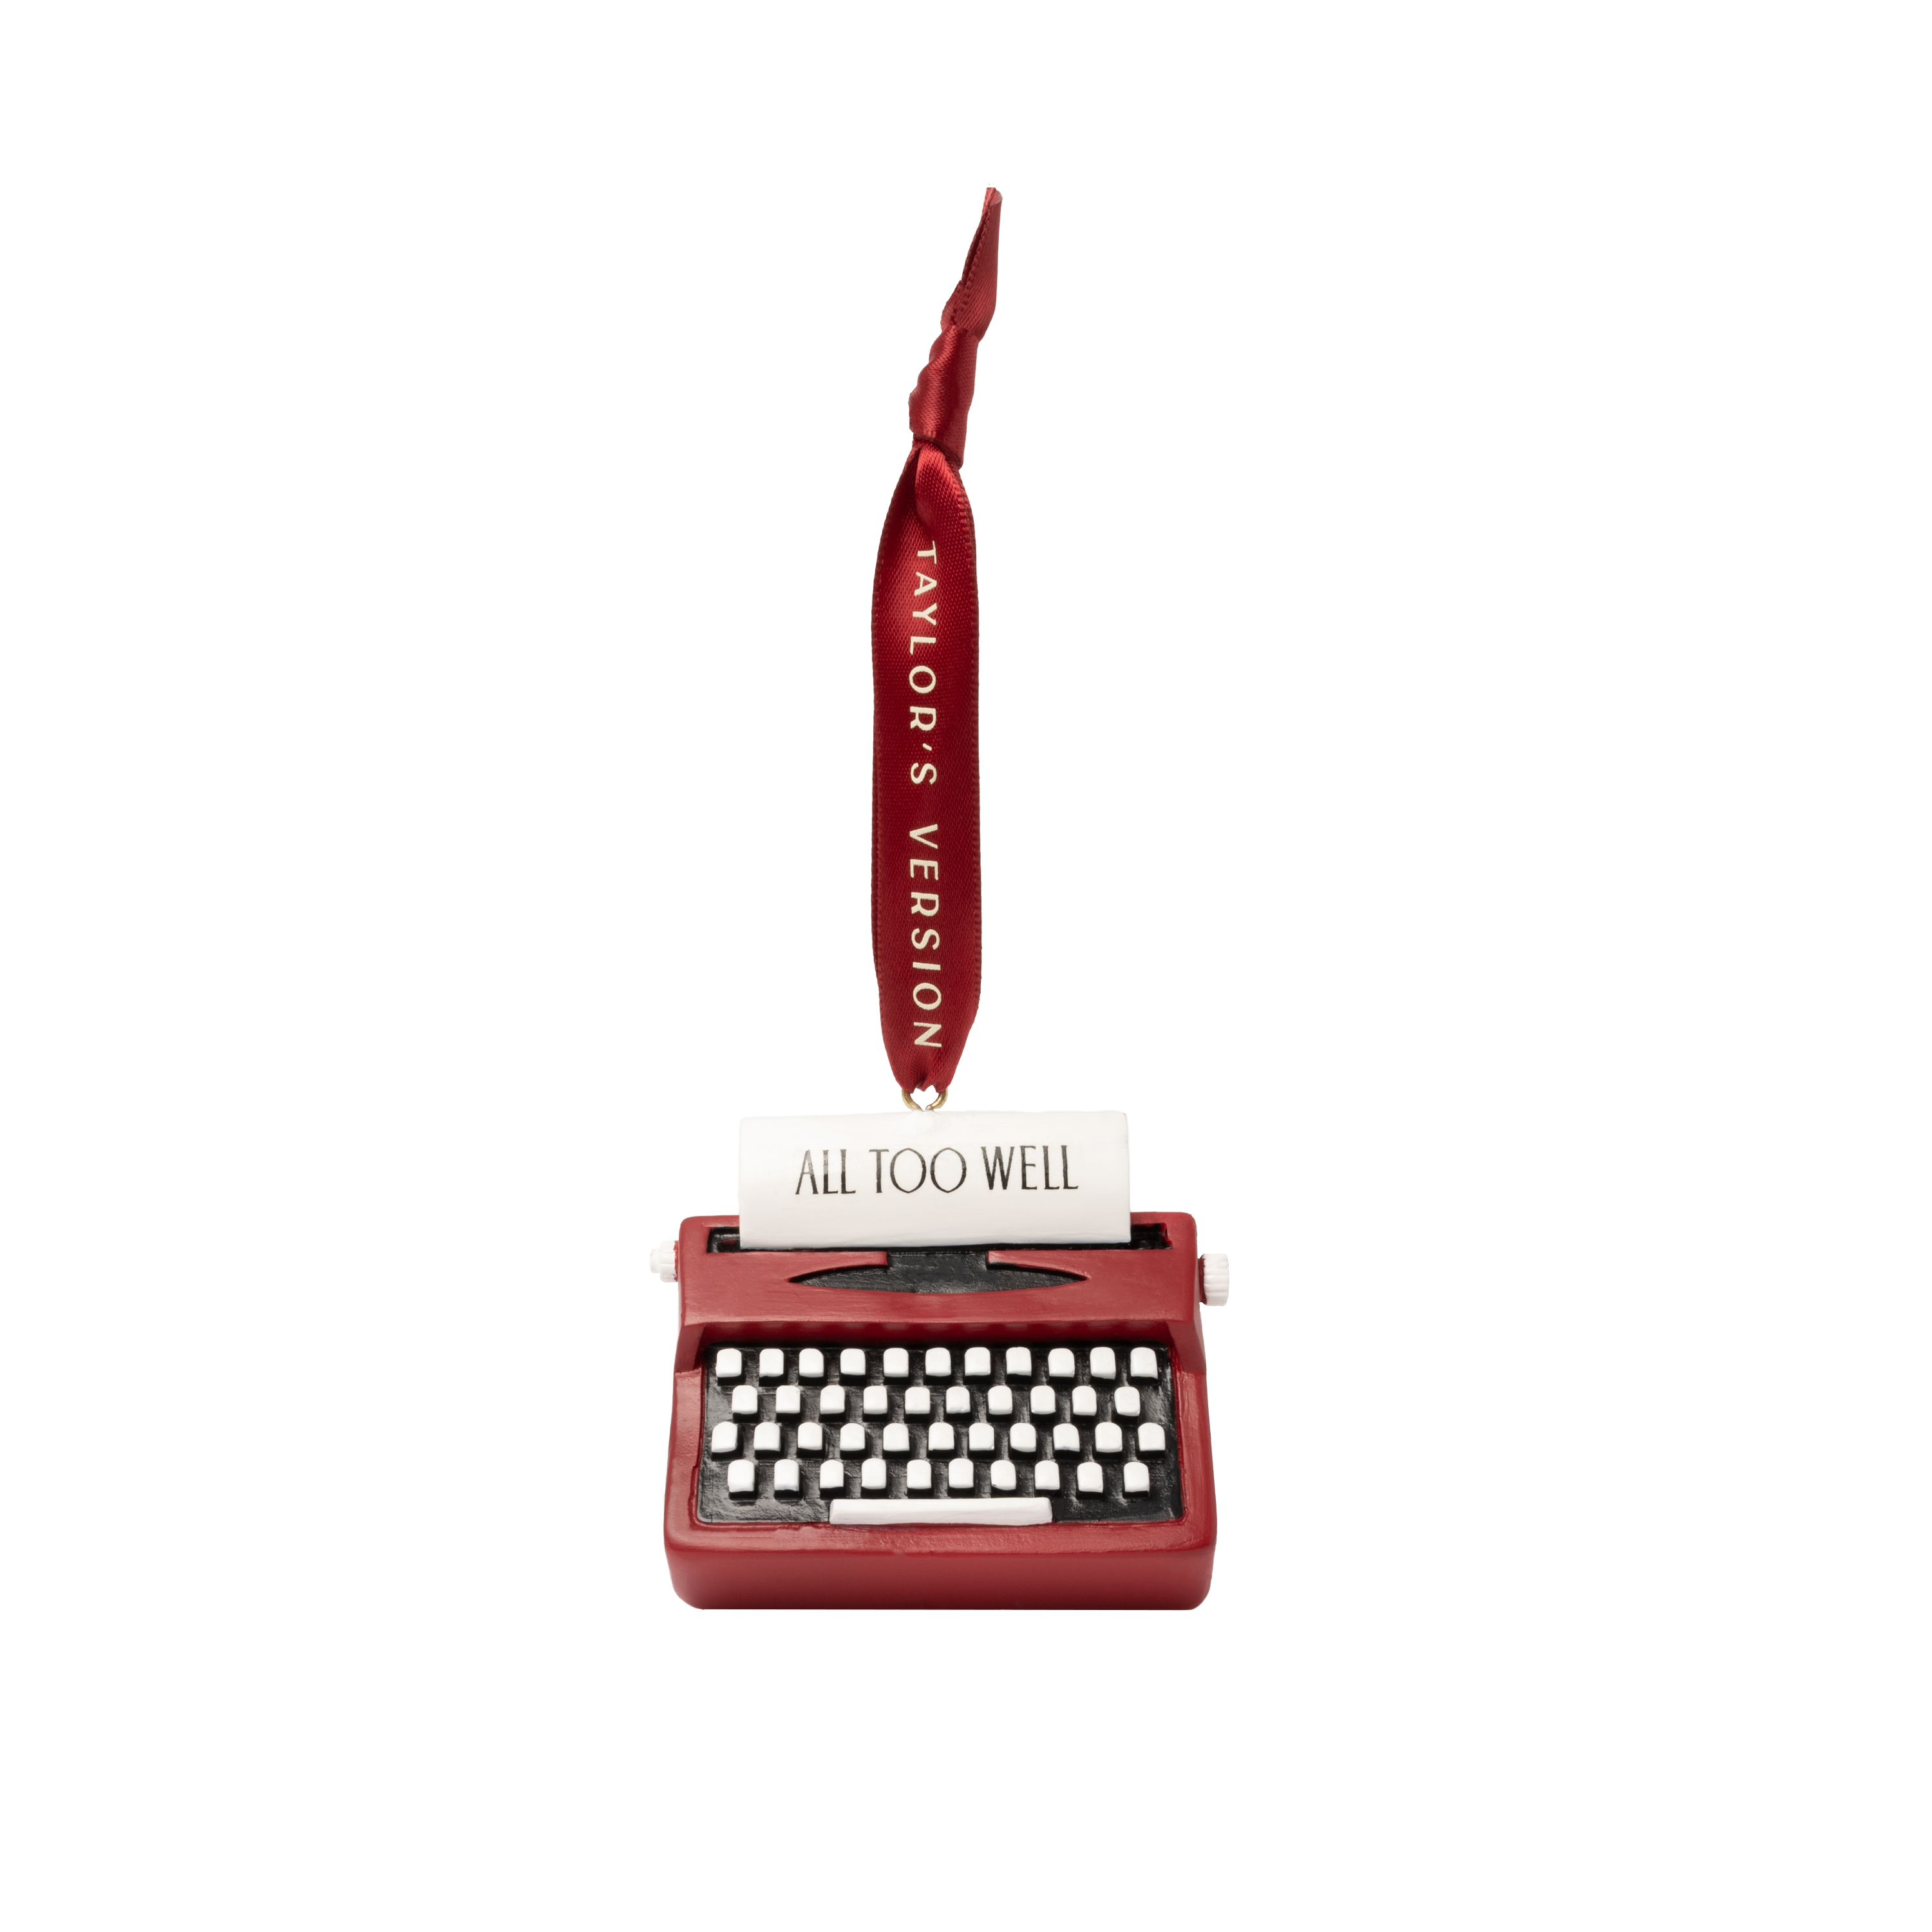 Taylor Swift - All Too Well Typewriter Ornament